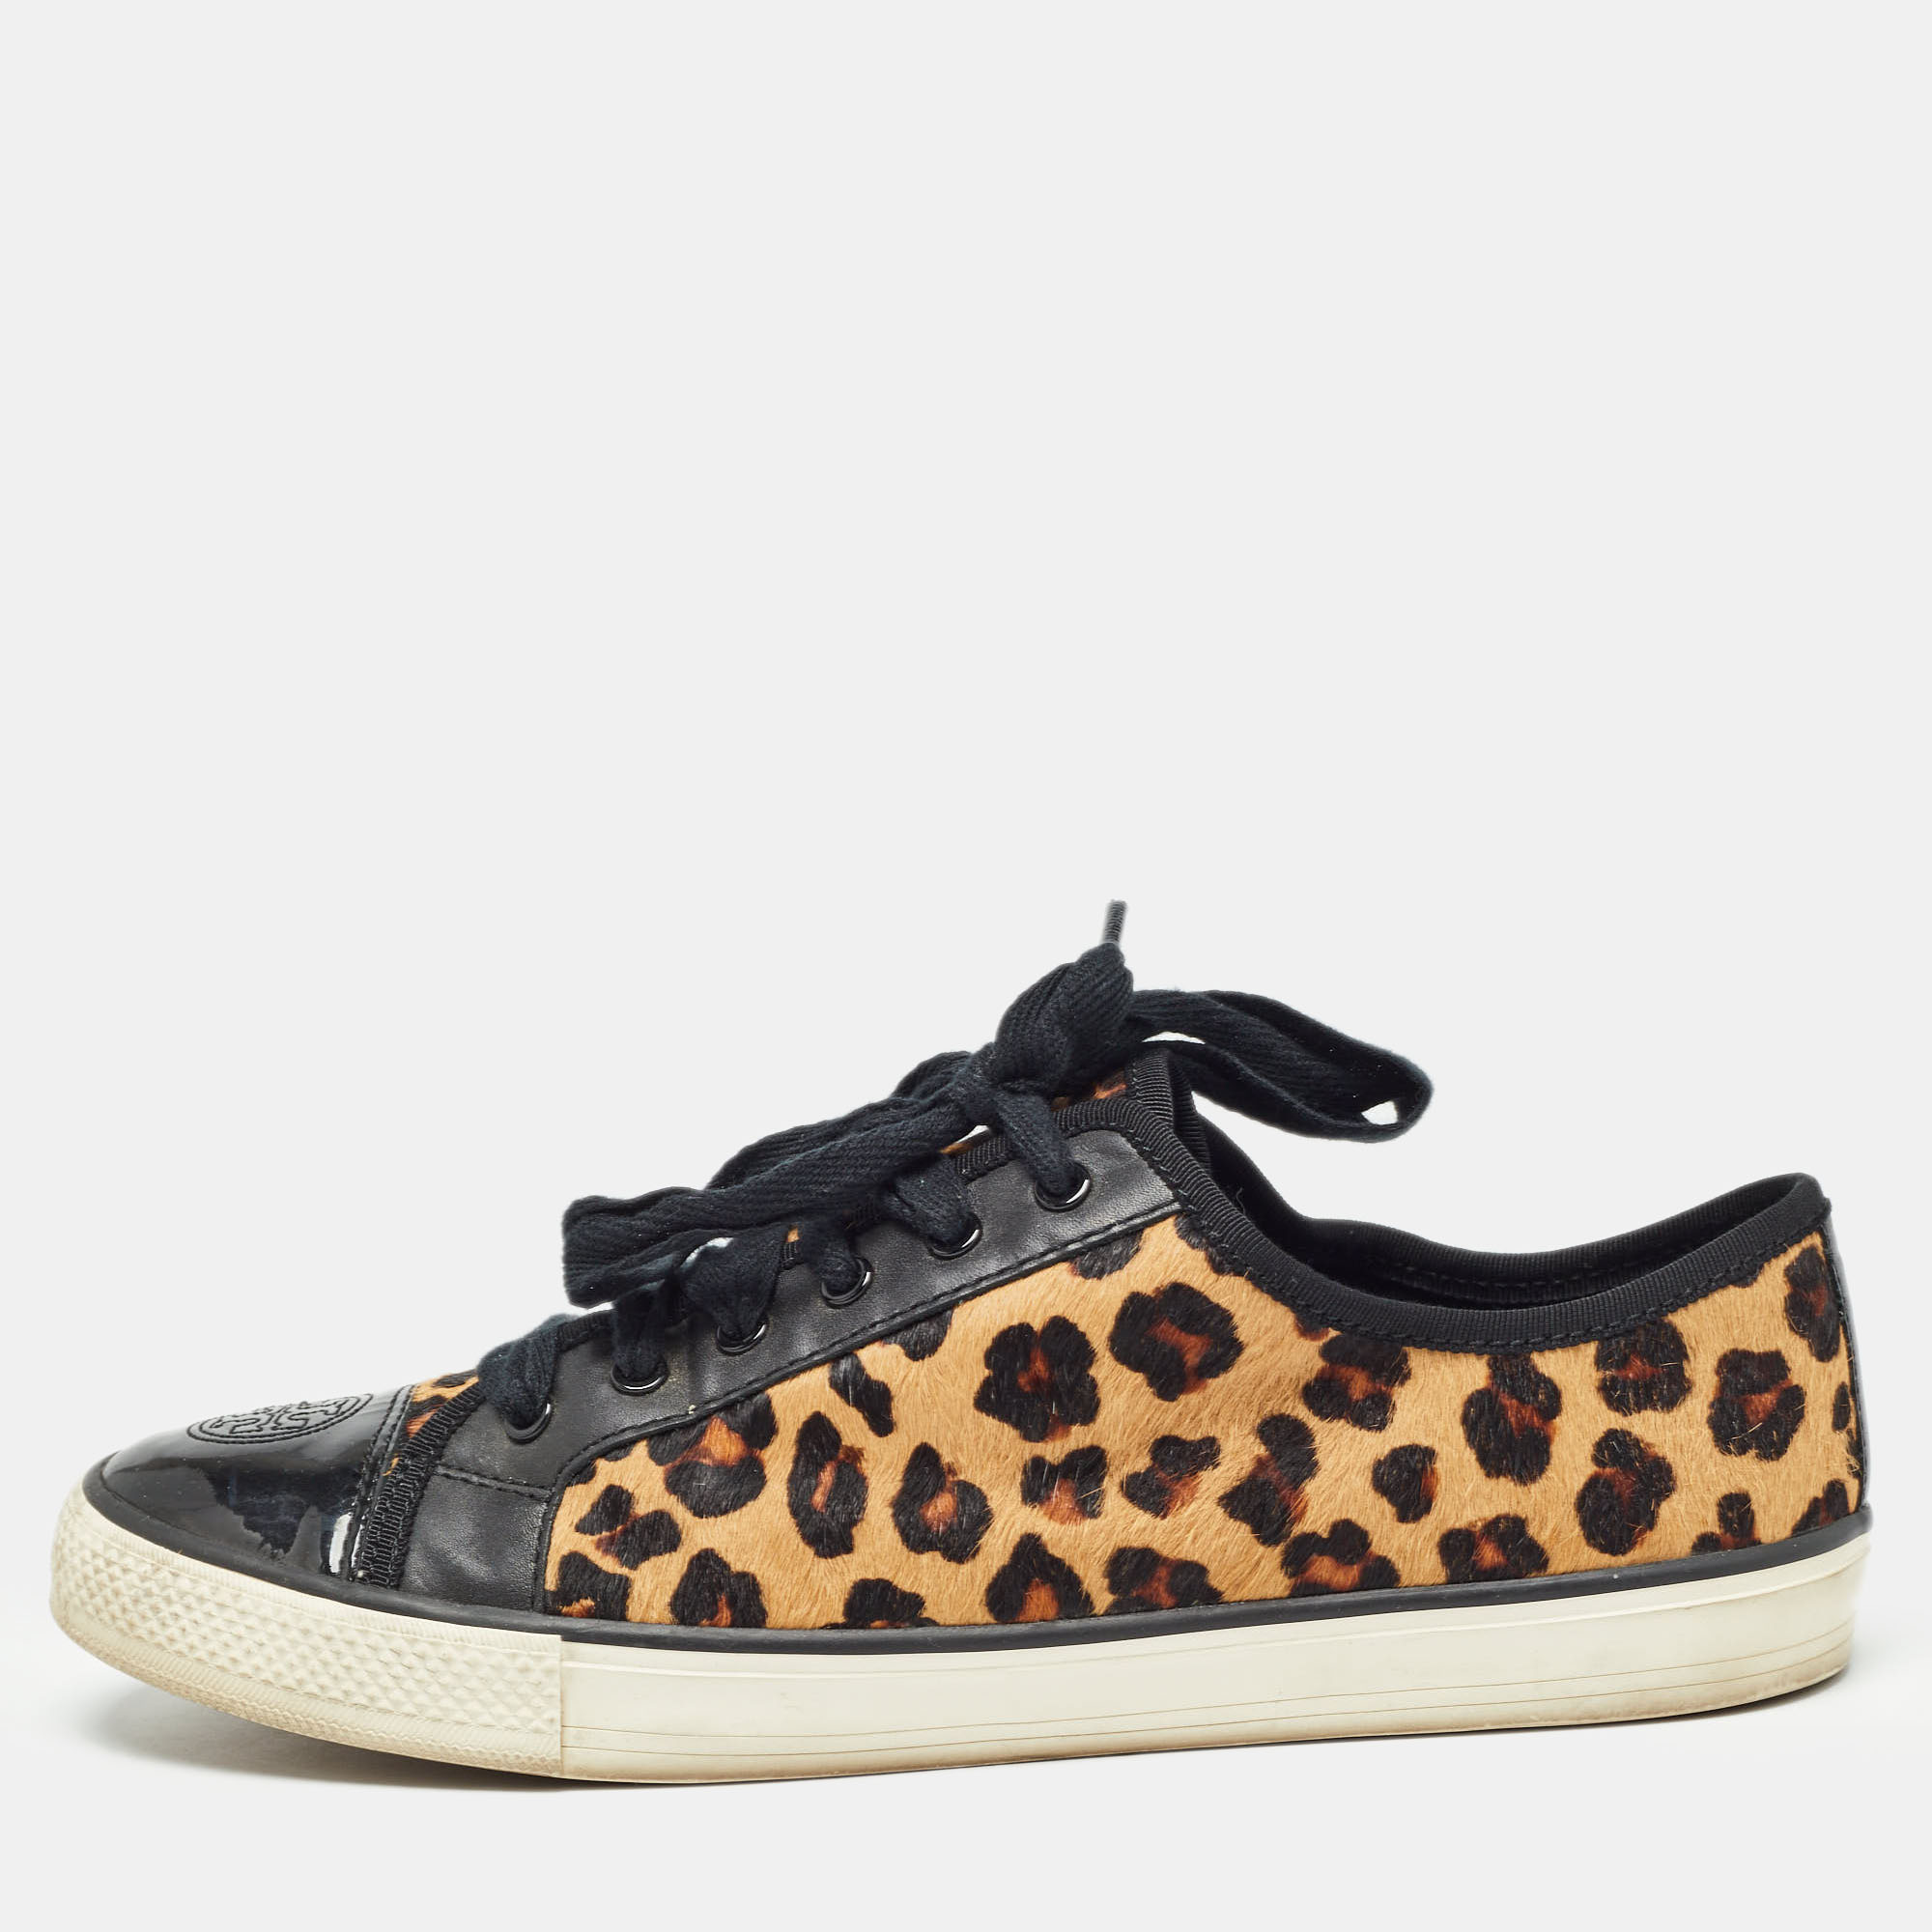 

Tory Burch Brown/Black Animal Print Calf Hair and Leather Low Top Sneakers Size